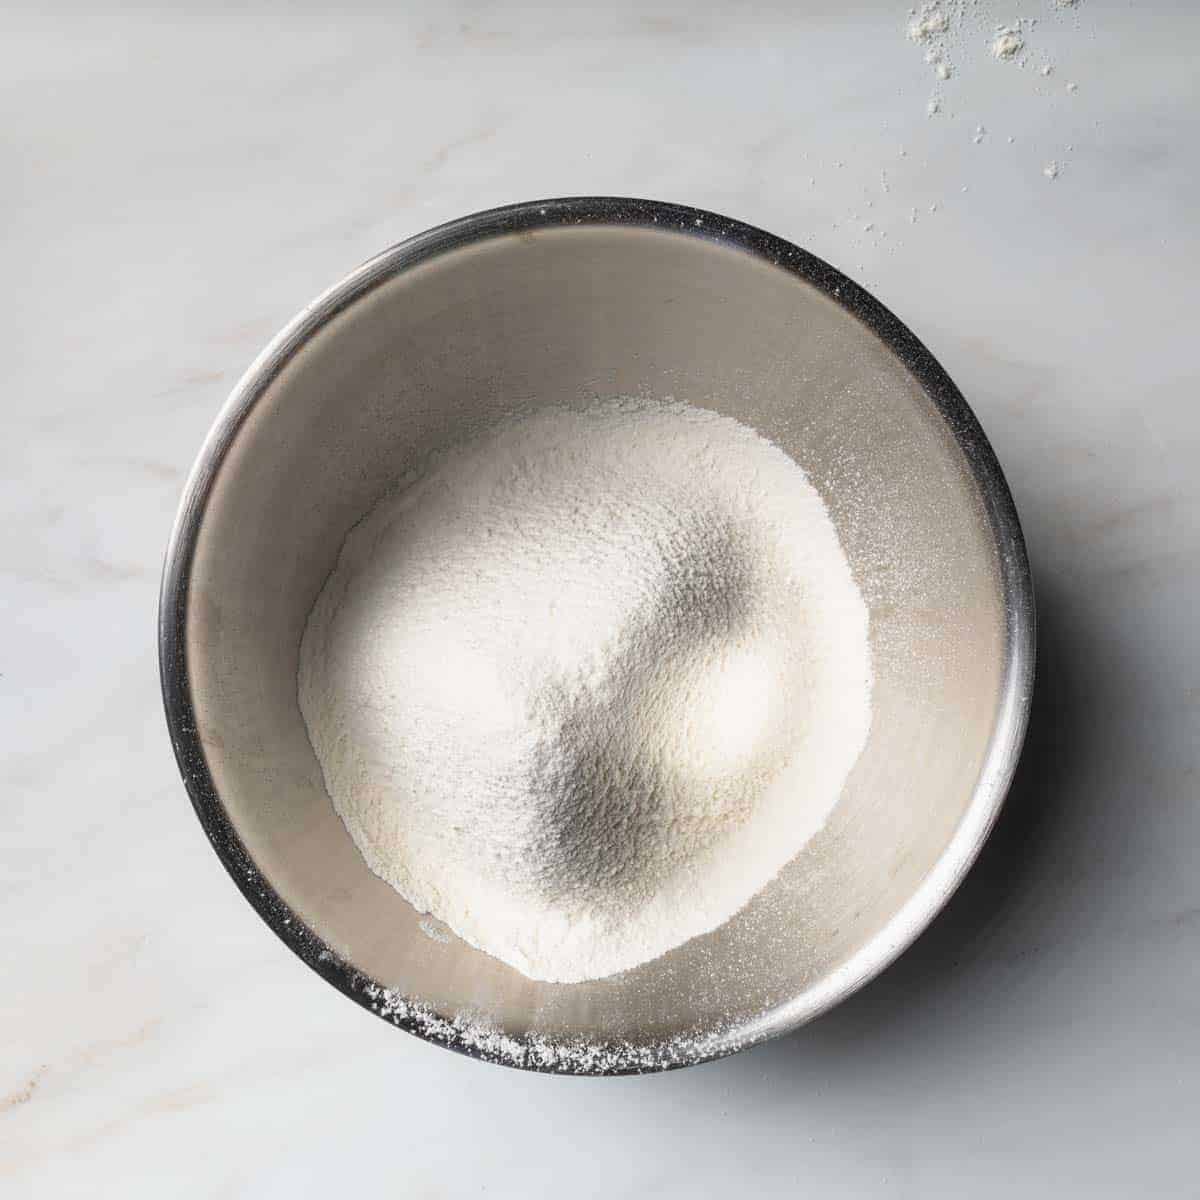 A metal bowl of sifted flour and other ingredients